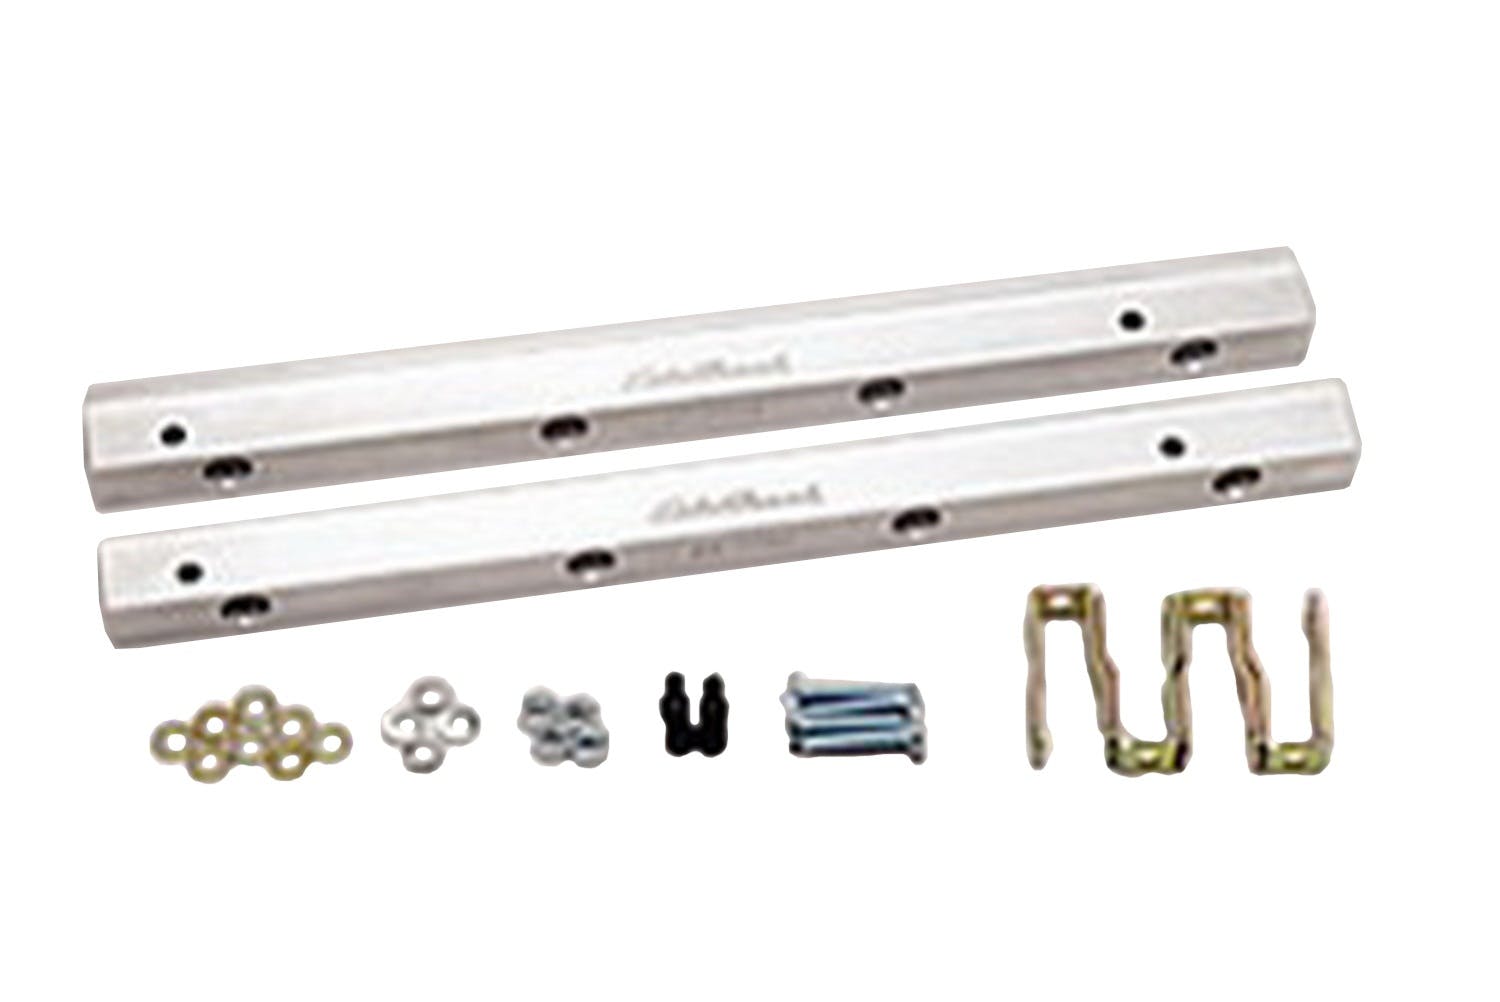 Edelbrock 3632 Fuel Rail Kit for Ford FE 390-428 -6 AN in Clear Finish